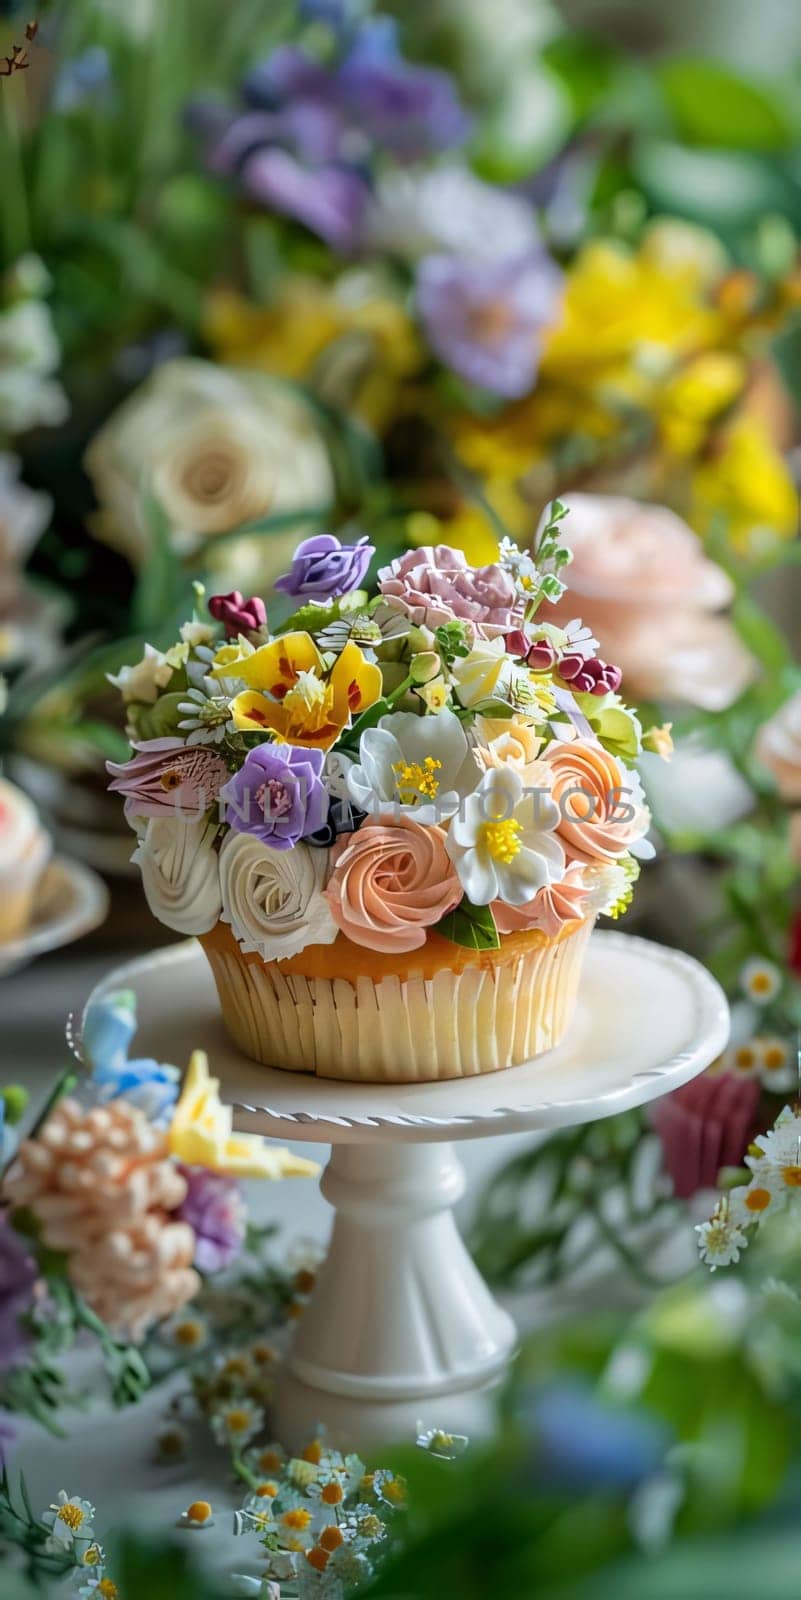 Cupcakes with flowers. Flowering flowers, a symbol of spring, new life. A joyful time of nature waking up to life.